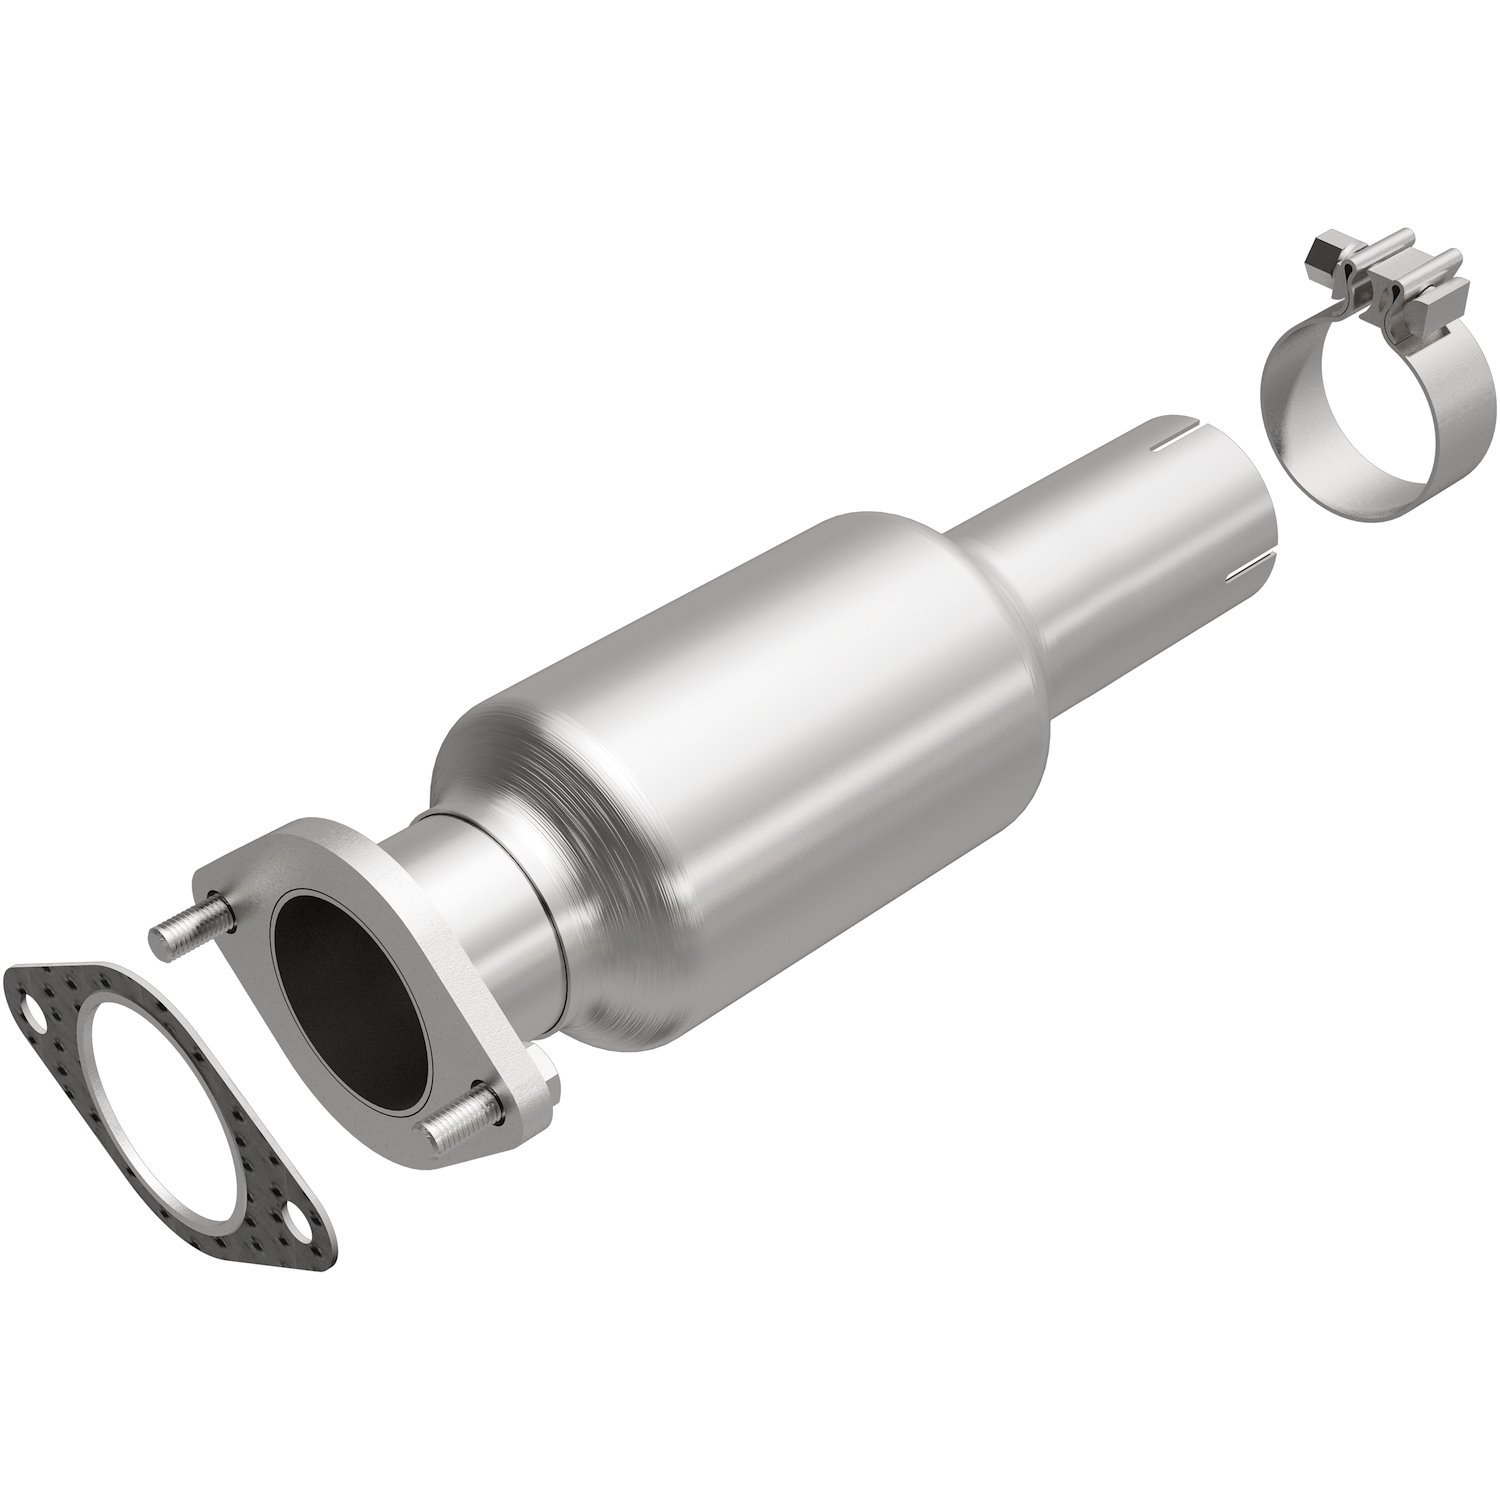 2013-2020 Ford Fusion OEM Grade Federal / EPA Compliant Direct-Fit Catalytic Converter